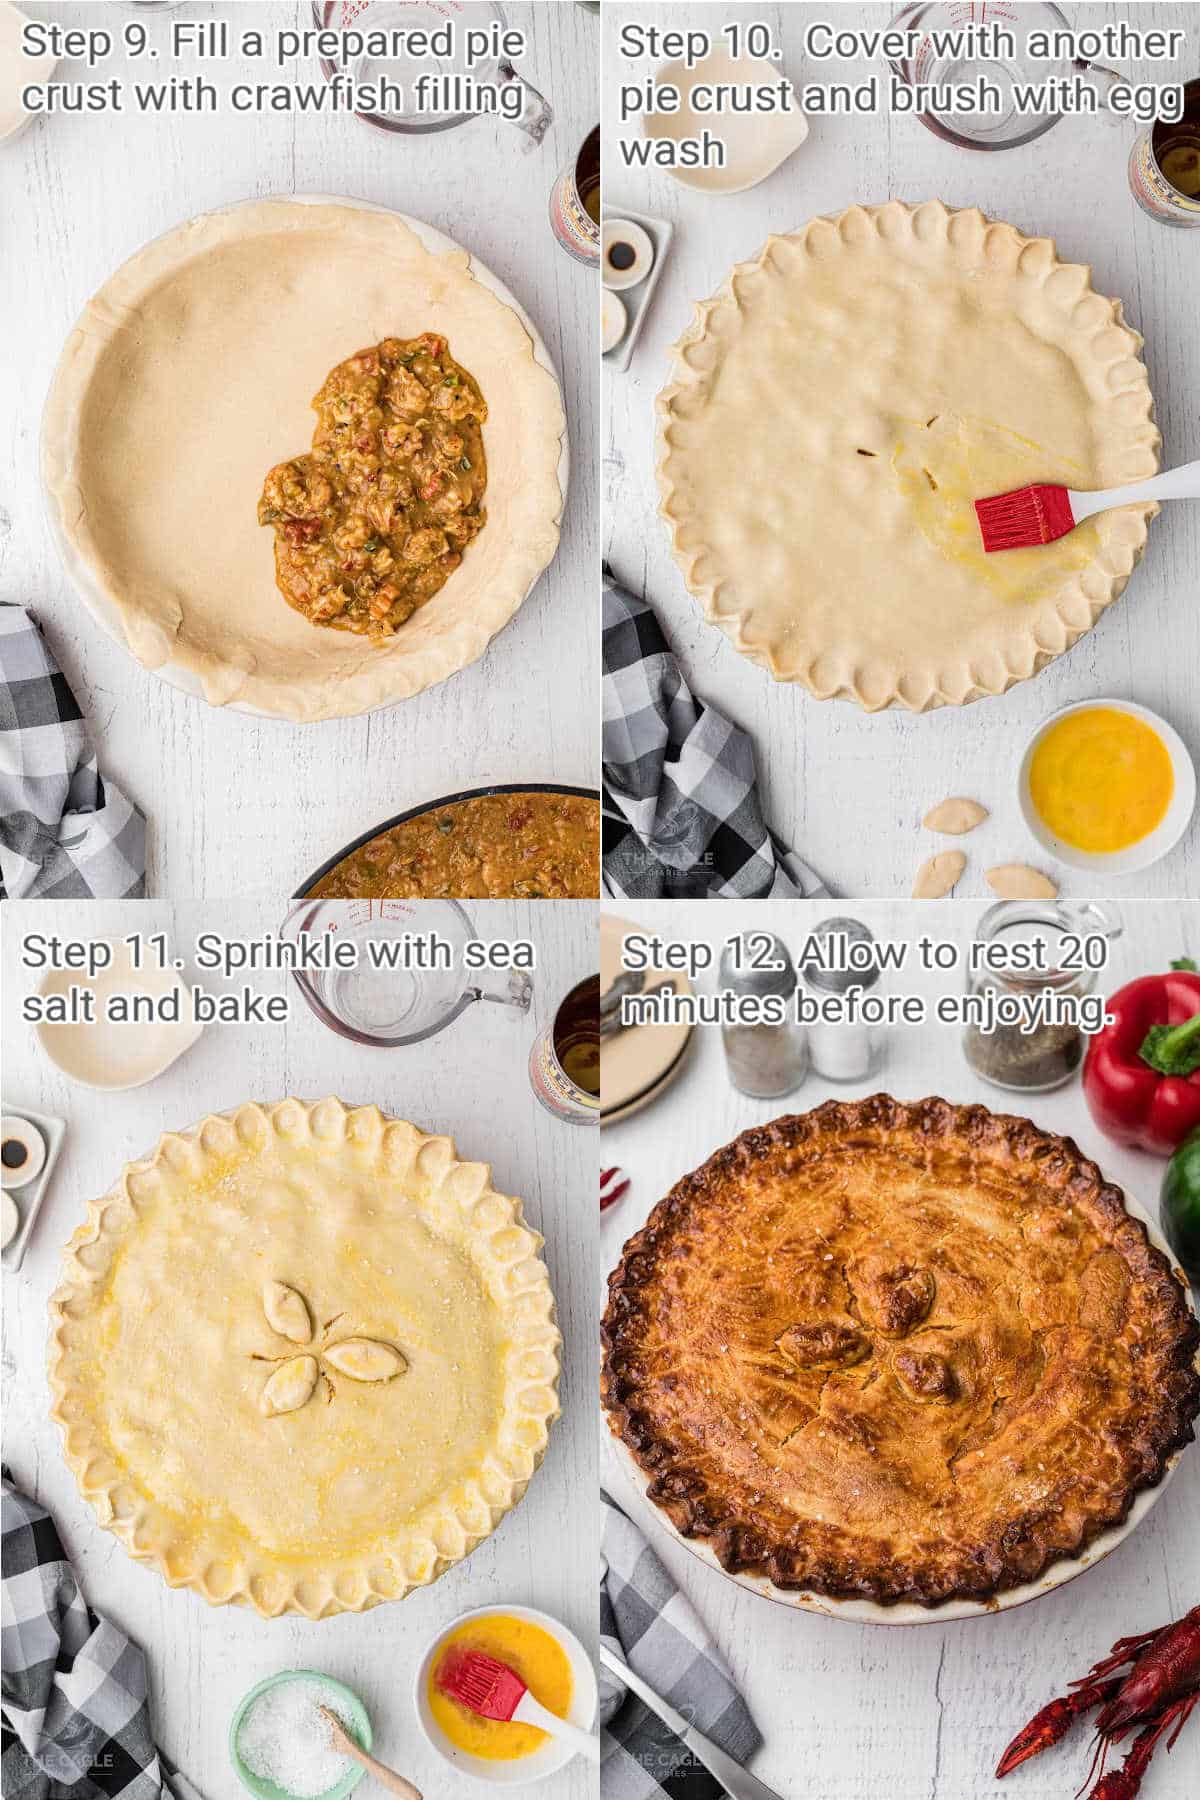 four images showing how to make a crawfish pie